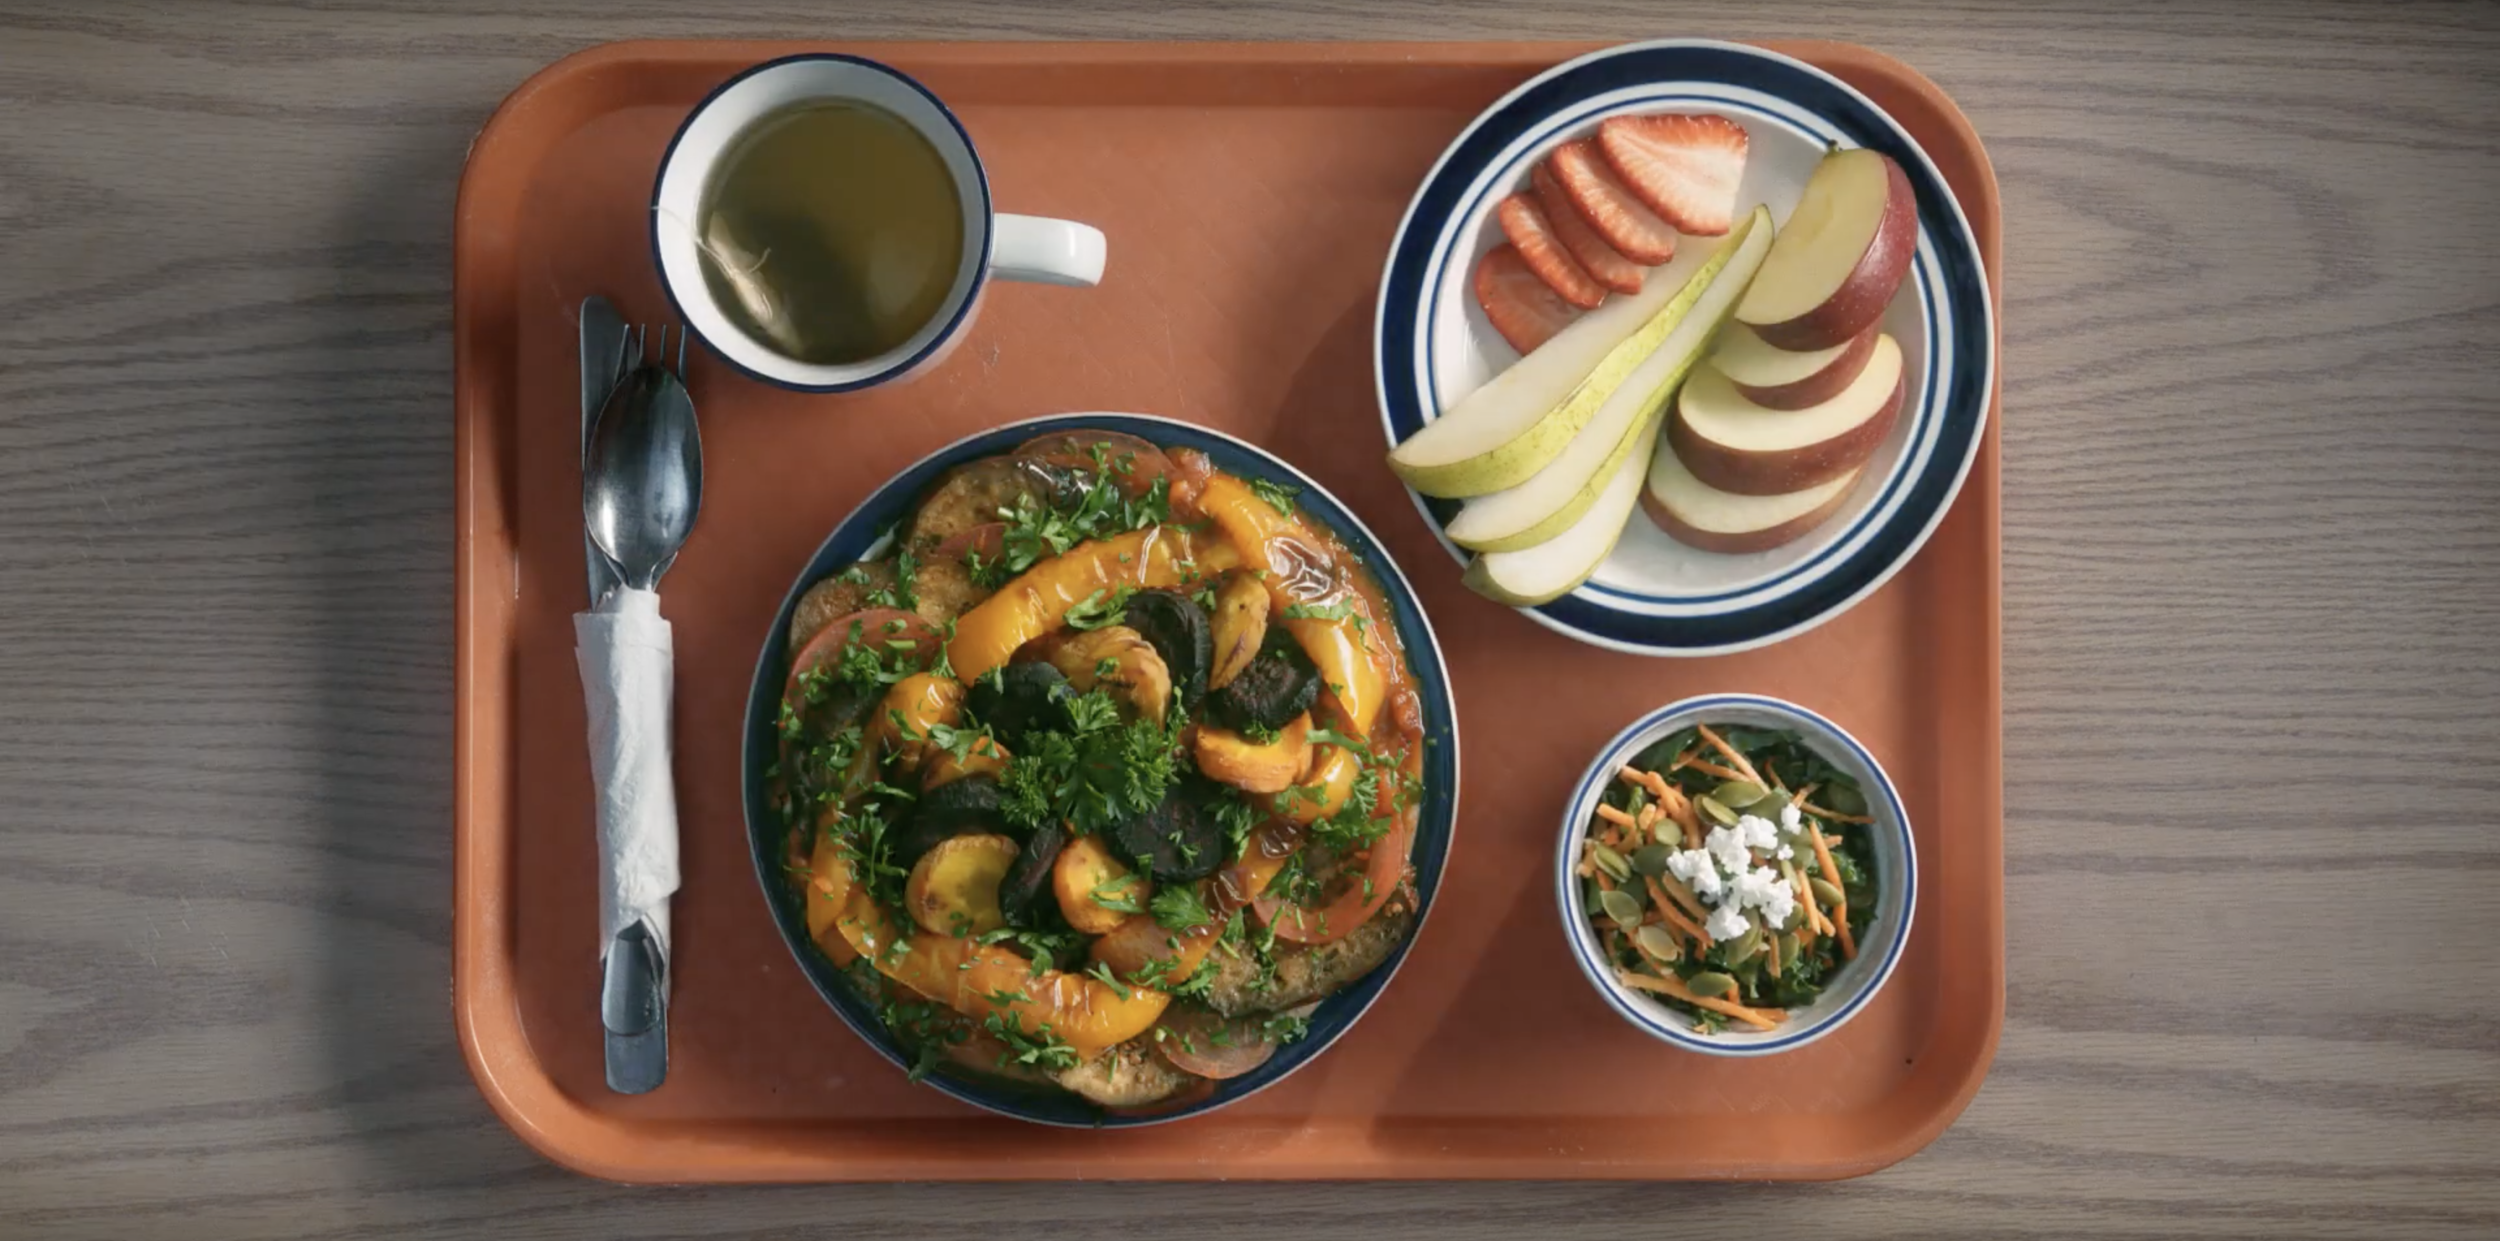 Ode to the Hospital Tray - Nourish The Future of Food in Health Care